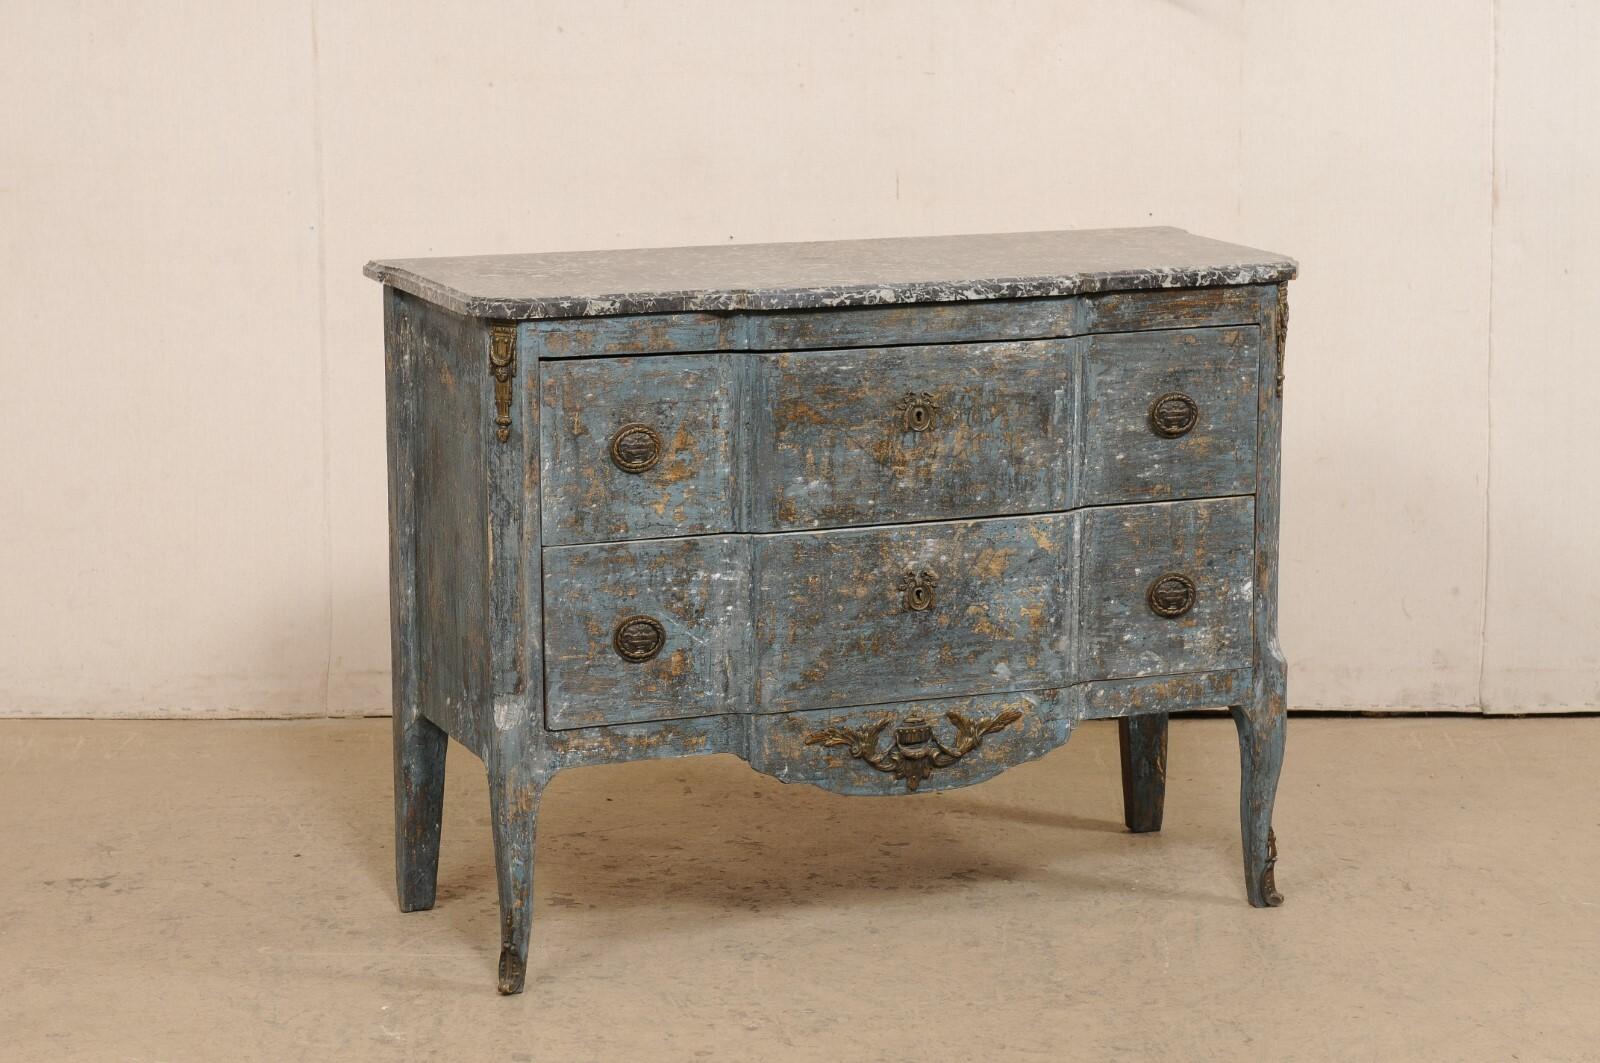 A French two-drawer commode, with shallow break-front design and marble top, from the early 20th century. This antique chest from France has a black marble top which rests atop a wooden chest consisting of two drawers flanking between canted front